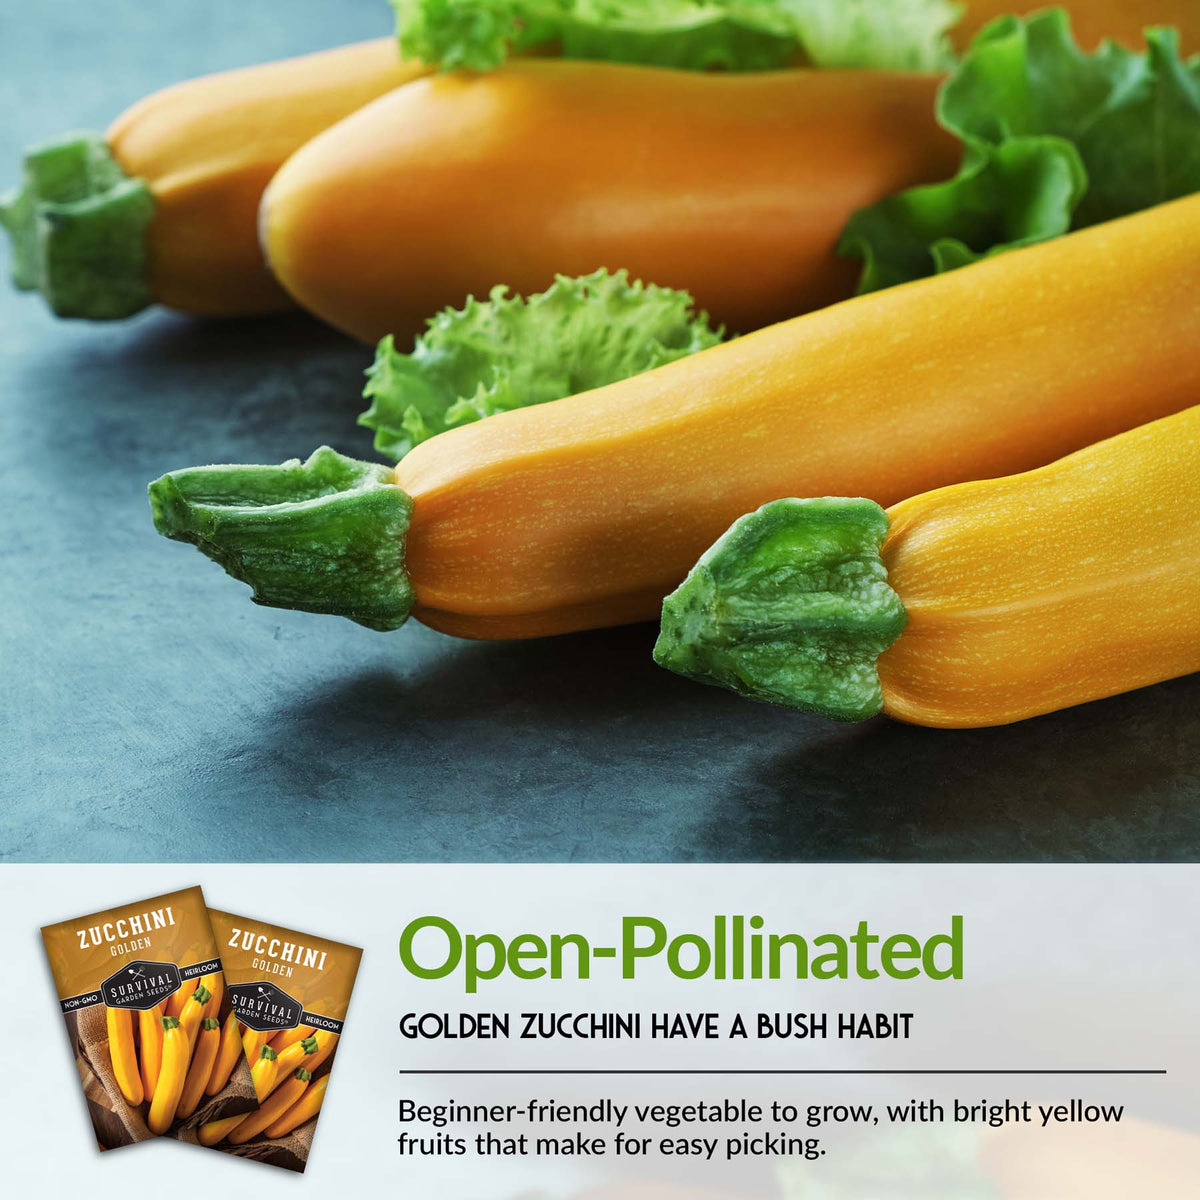 Golden Zucchini seeds are open pollinated